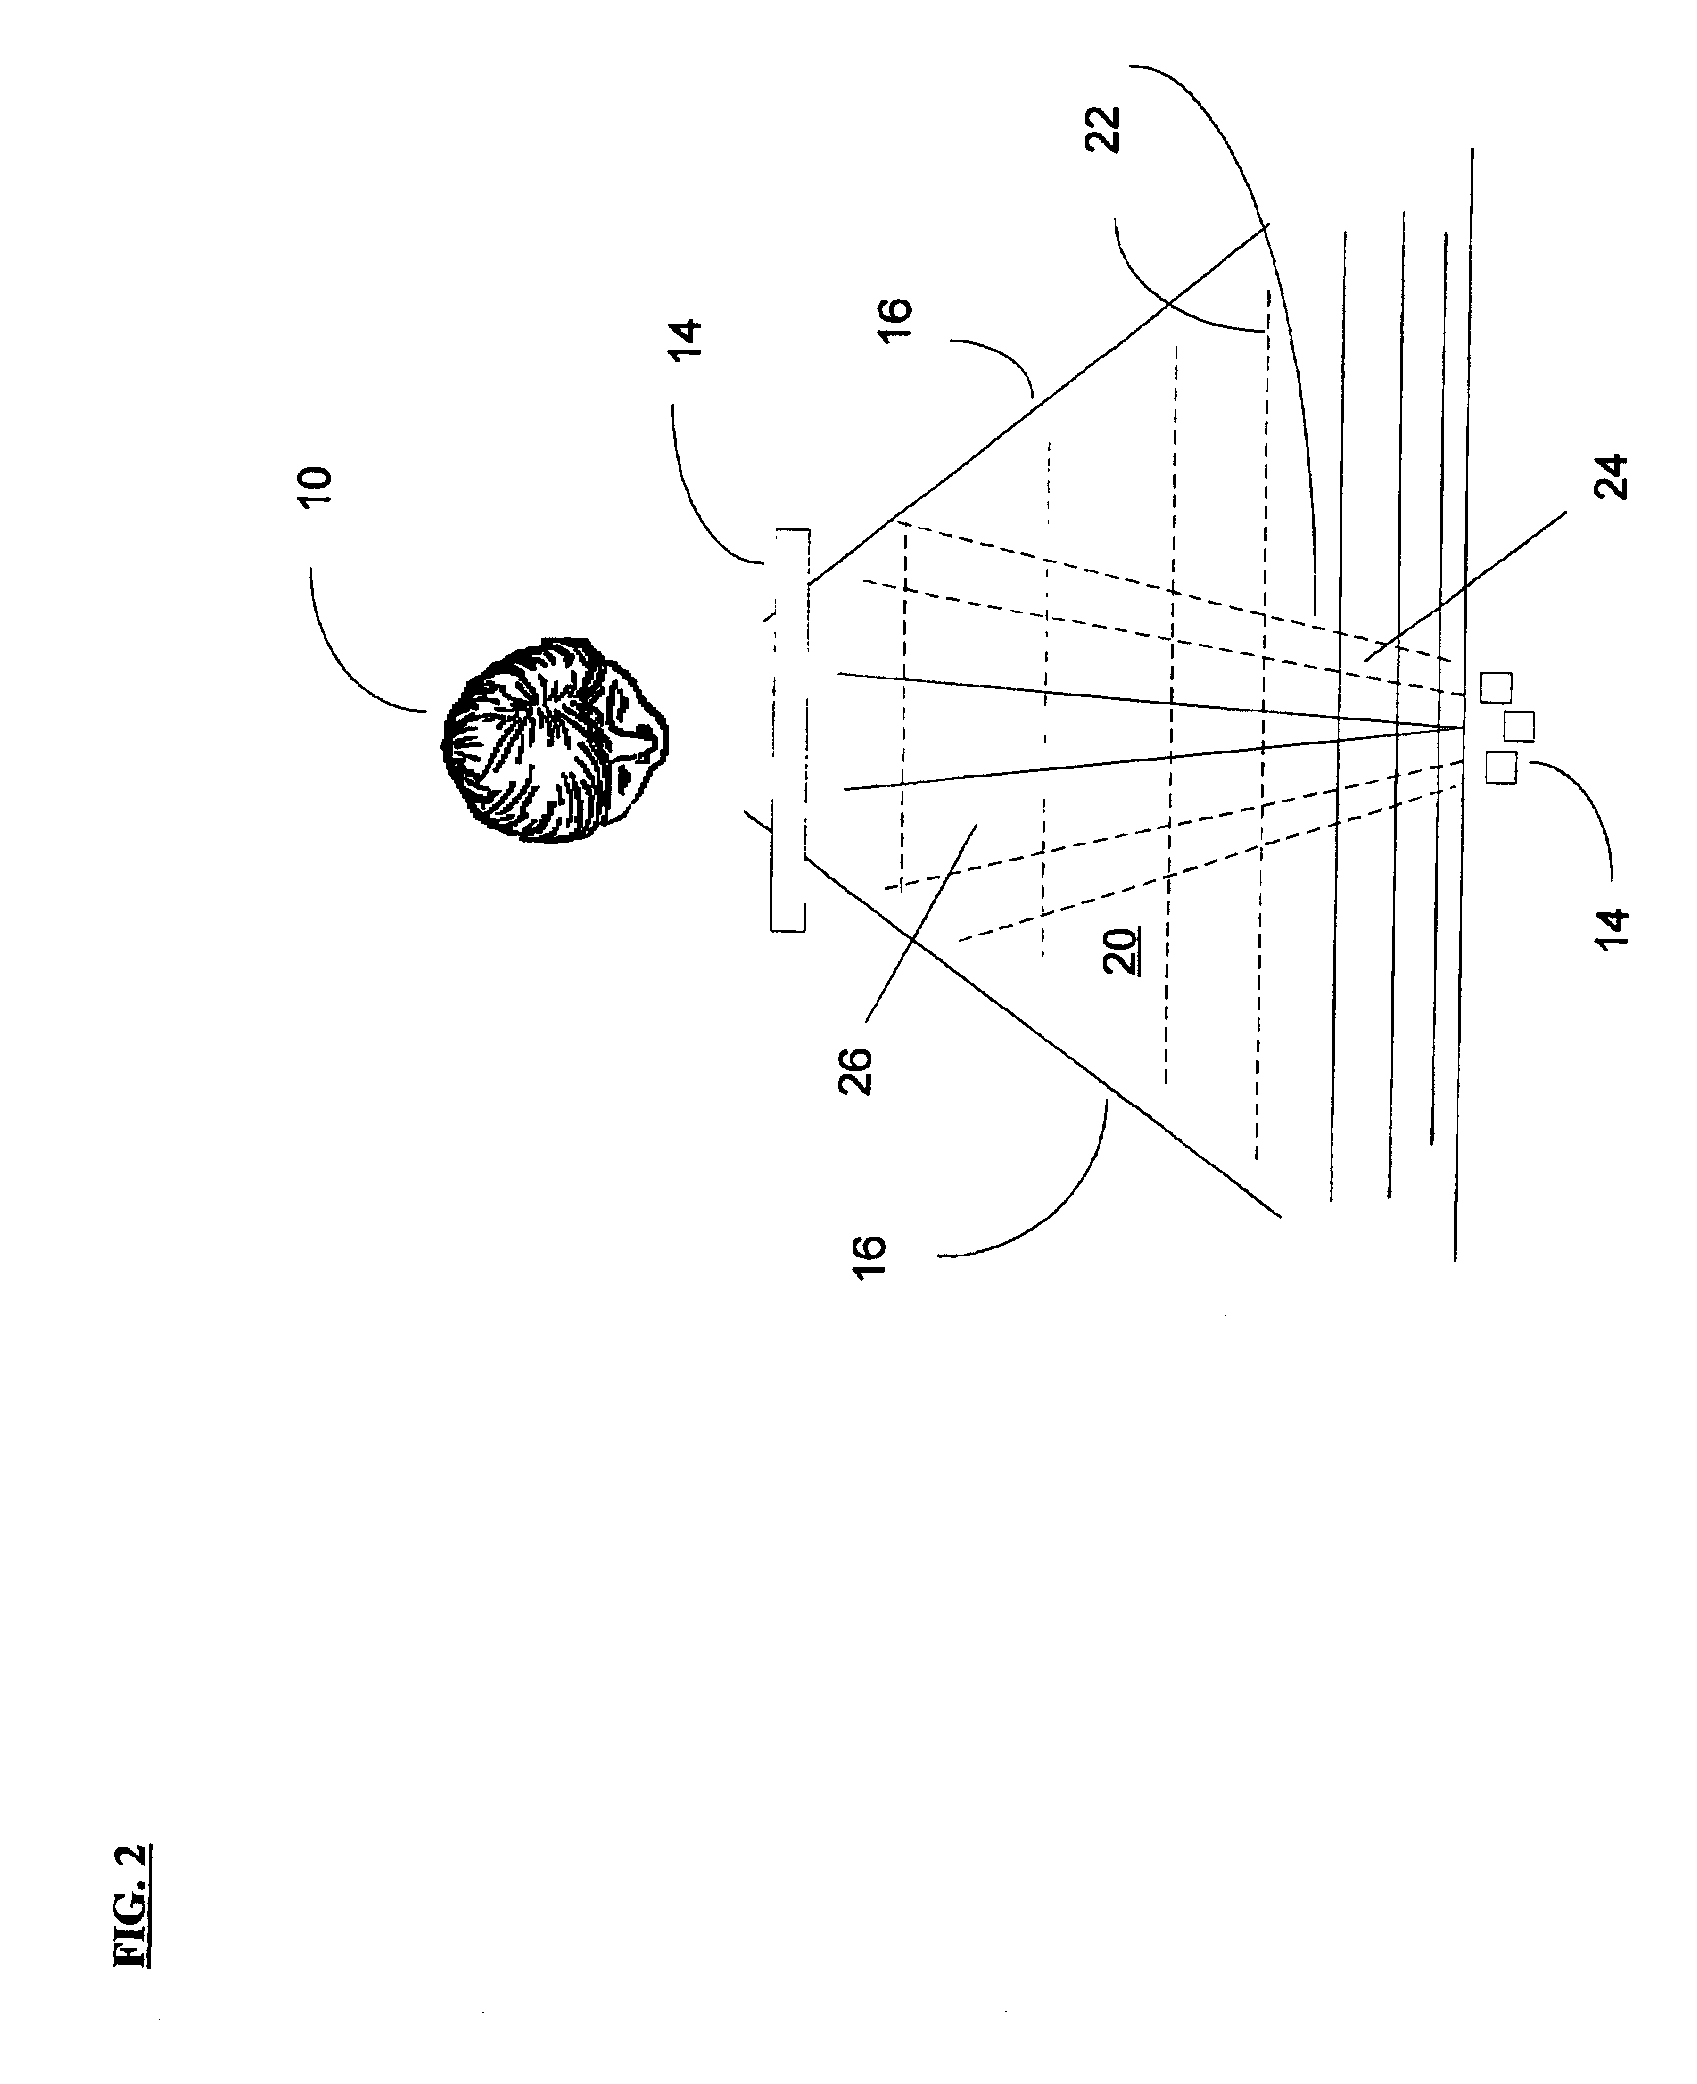 Instrument reference flight display system for horizon representation of direction to next waypoint